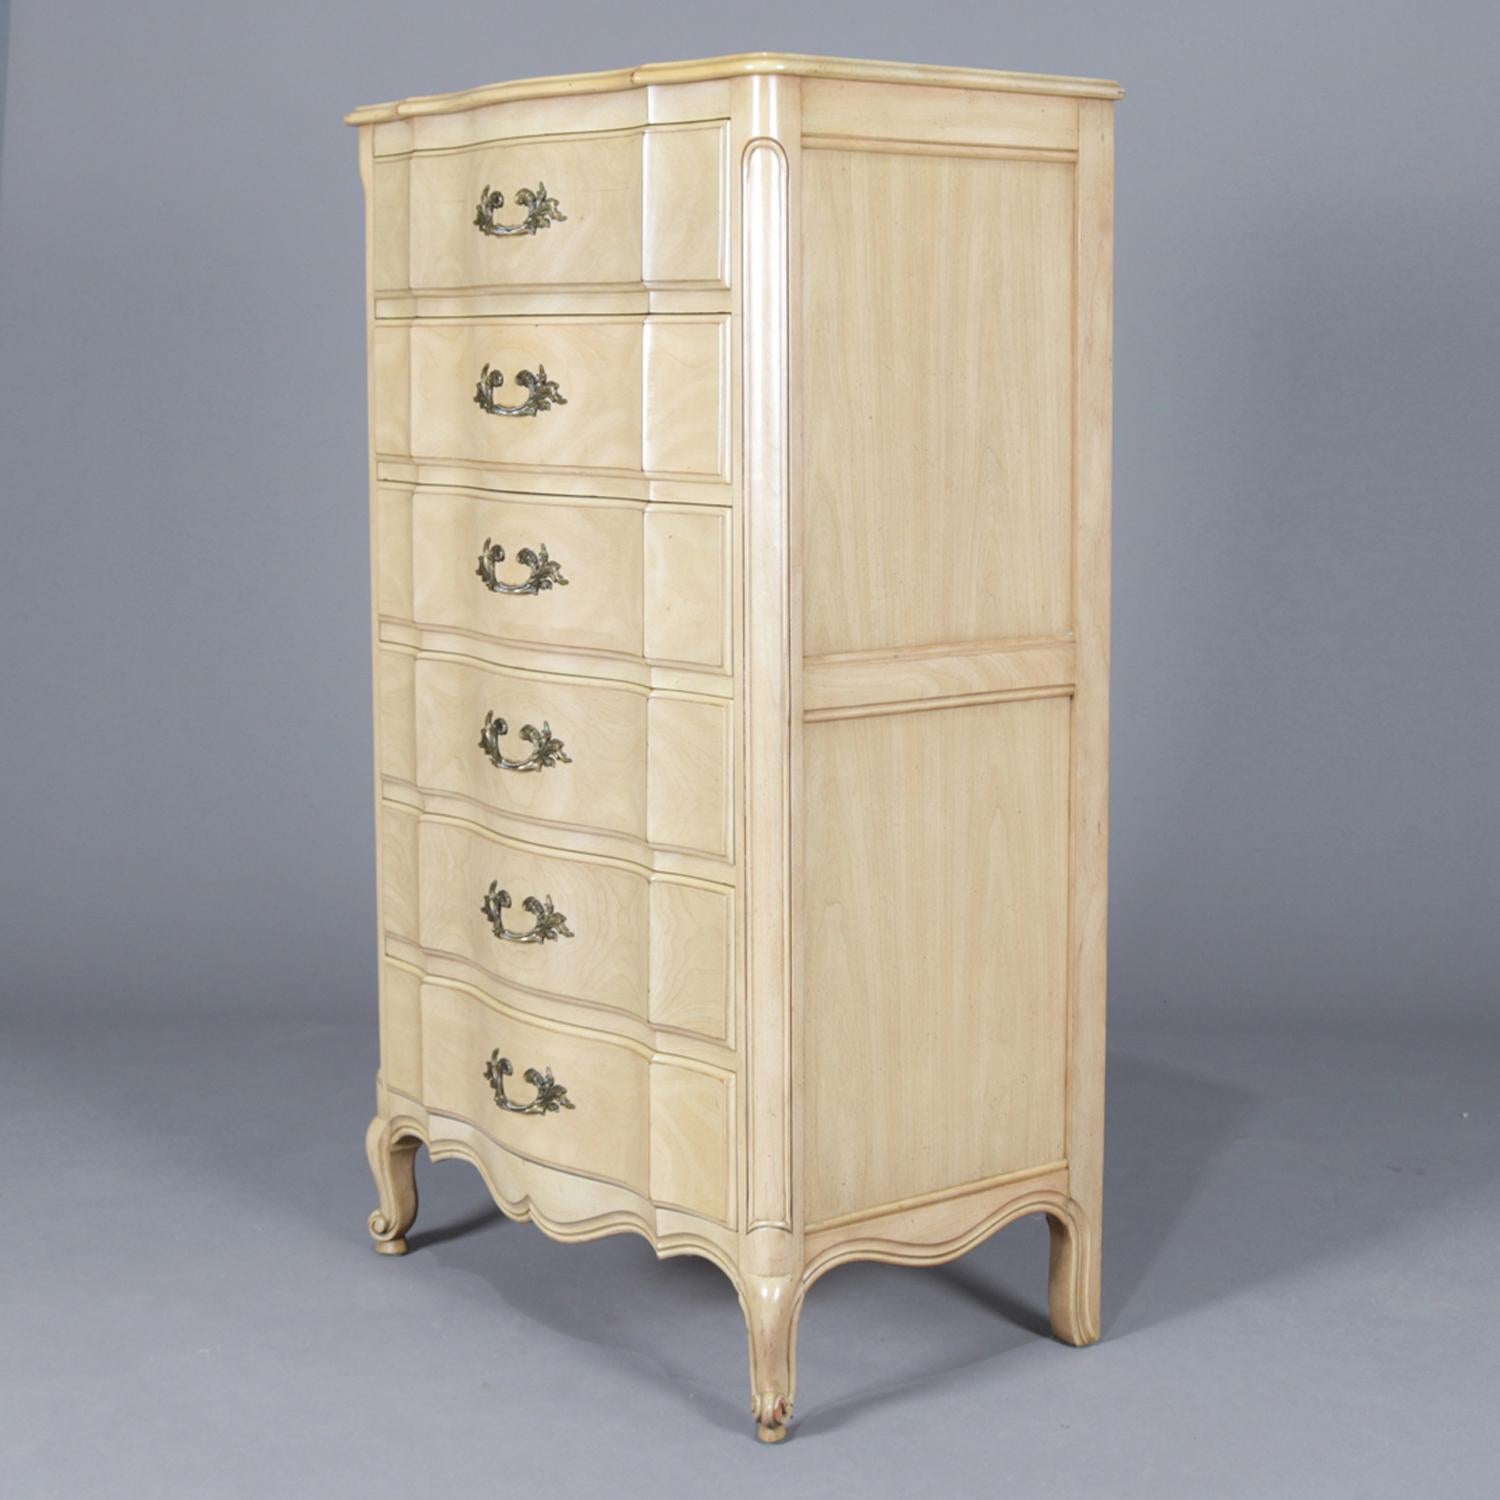 A vintage French Provincial style high chests of drawers by John Widdicomb feature serpentine fronts, six drawers and is raised on cabriole legs and with white washed painted finish, cast foliate form pulls throughout, maker brand on drawer